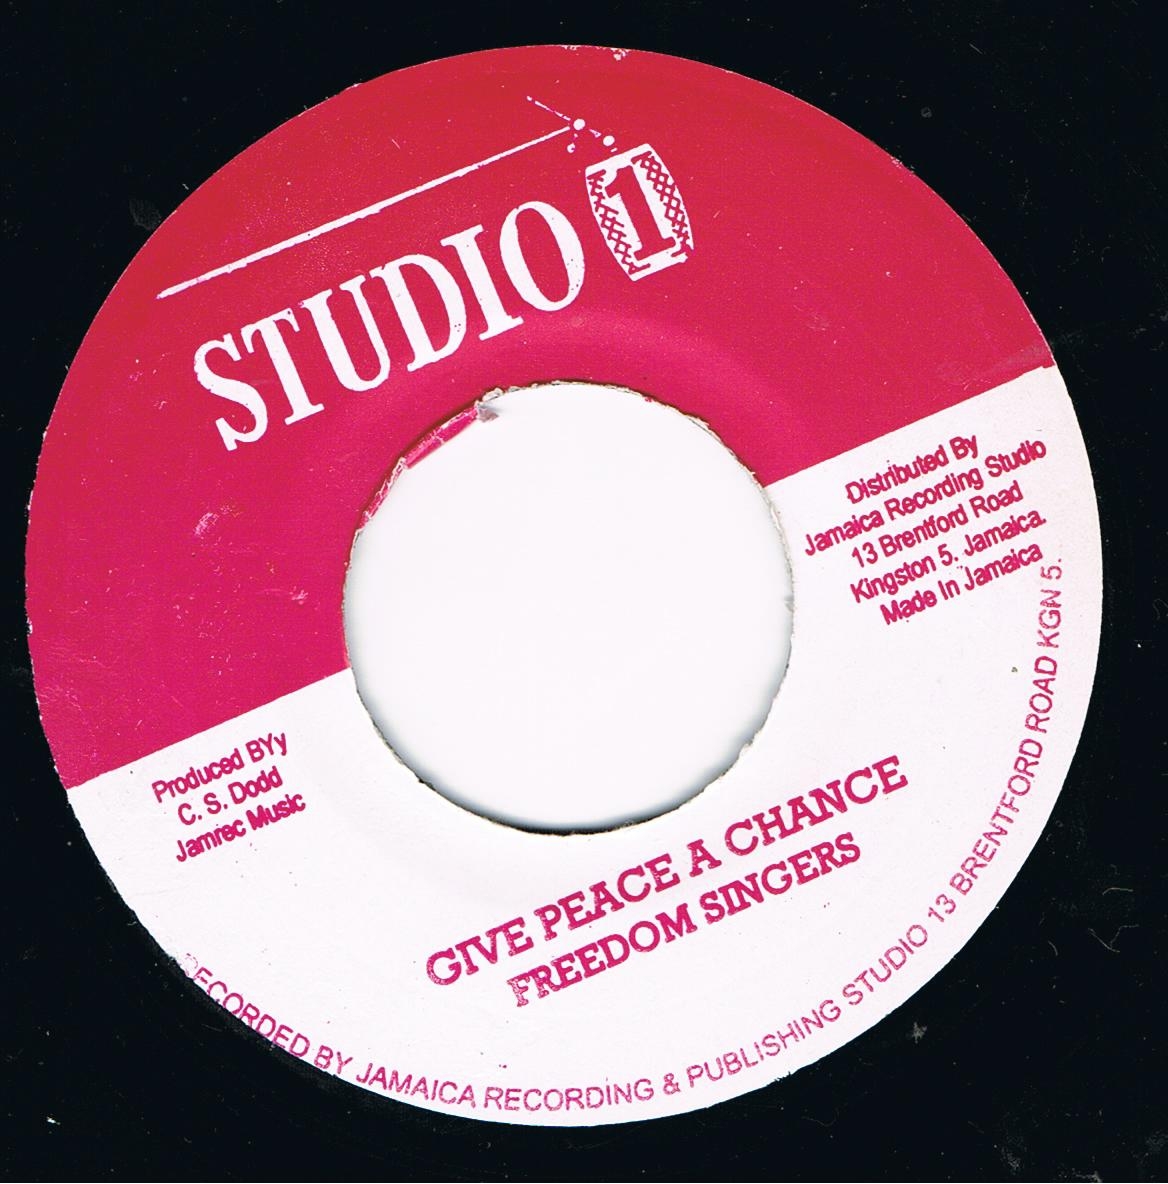 The Freedom Singers - Give Peace A Chance / Sound Dimension - Traveling Home (Original Stamper 7")